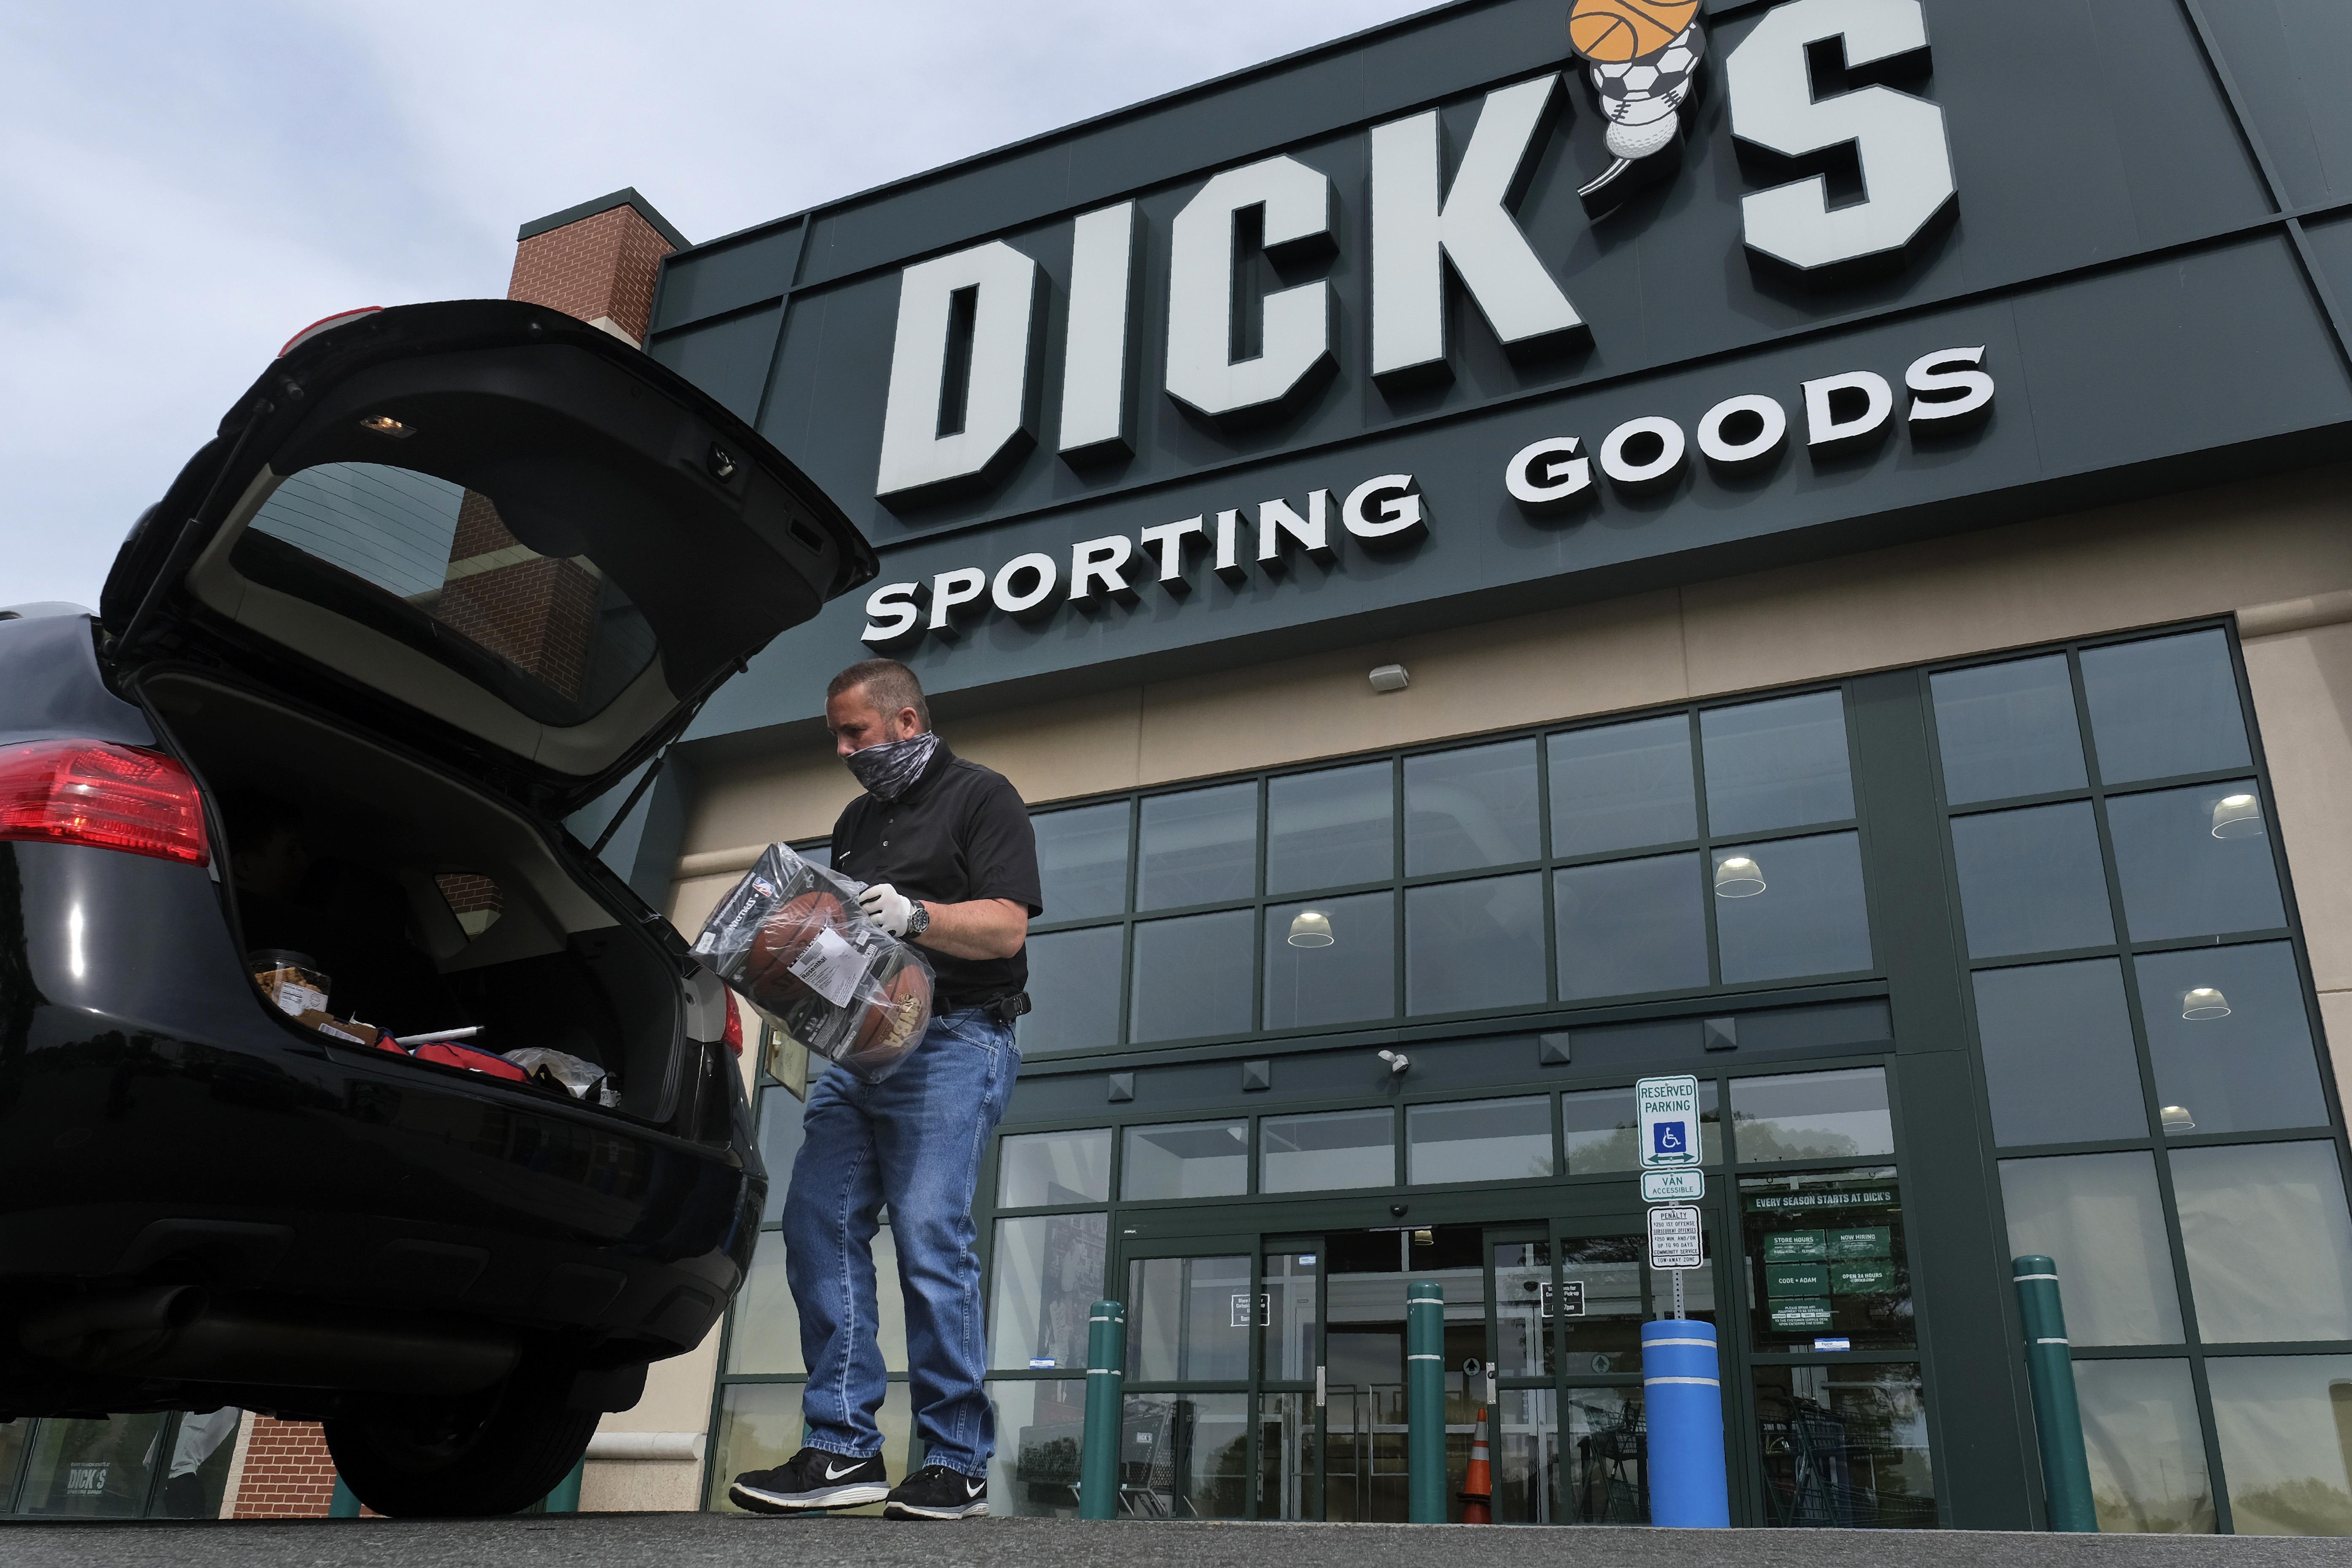 Dick's Sporting Goods to Revamp Stores to Appeal More to Women - Bloomberg